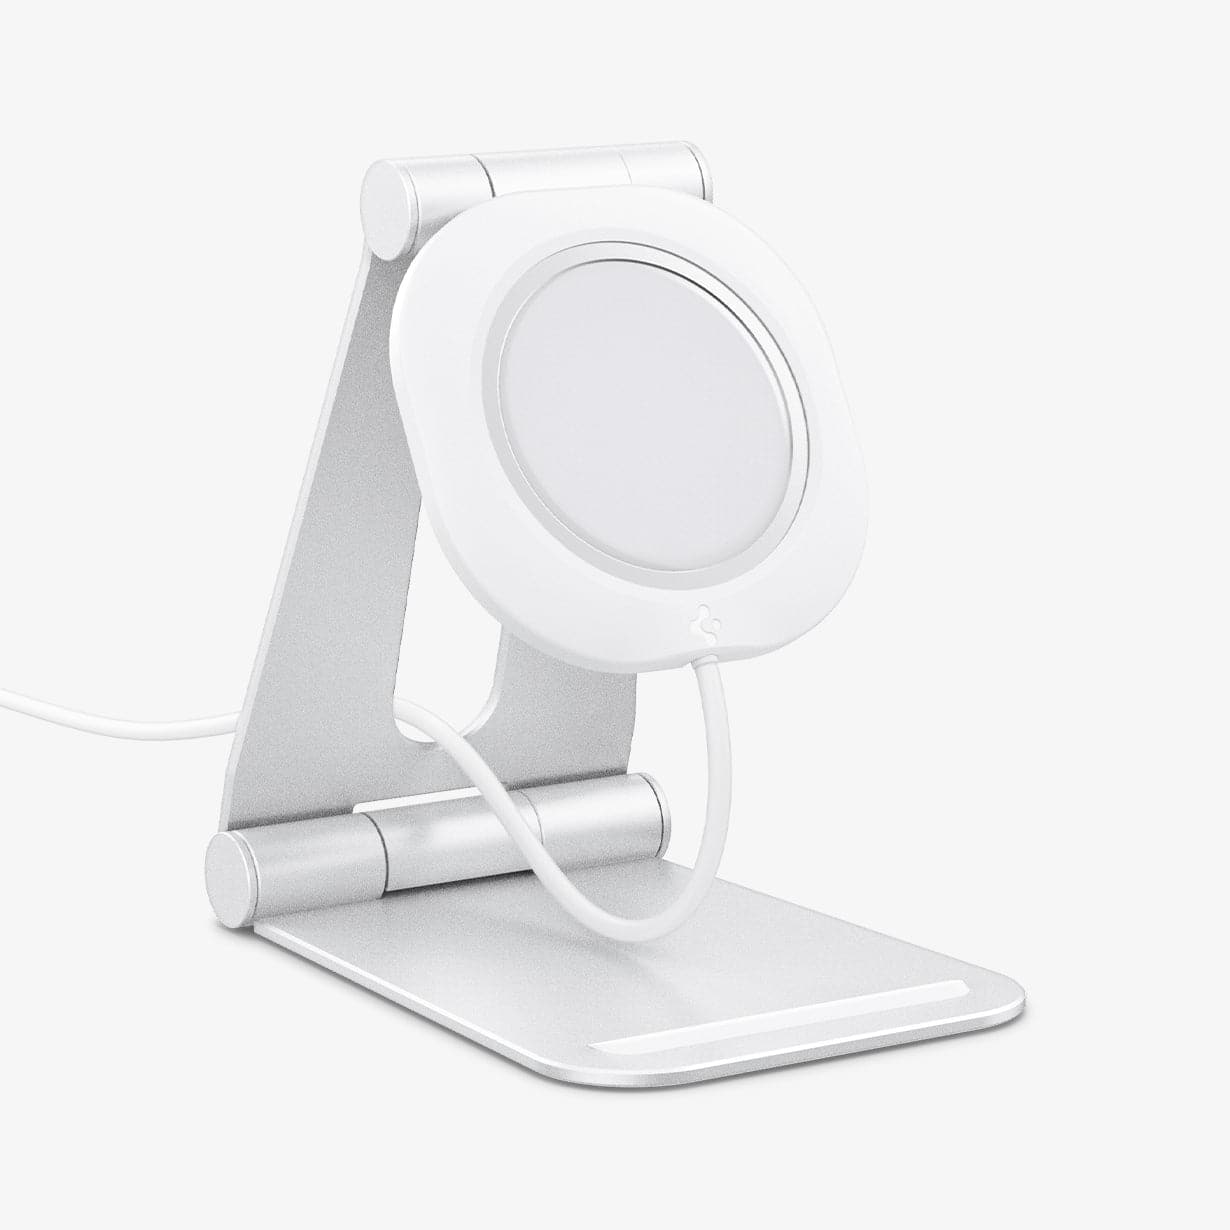 AMP02673 - MagFit Charger Stand (MagFit) in white showing the front and side